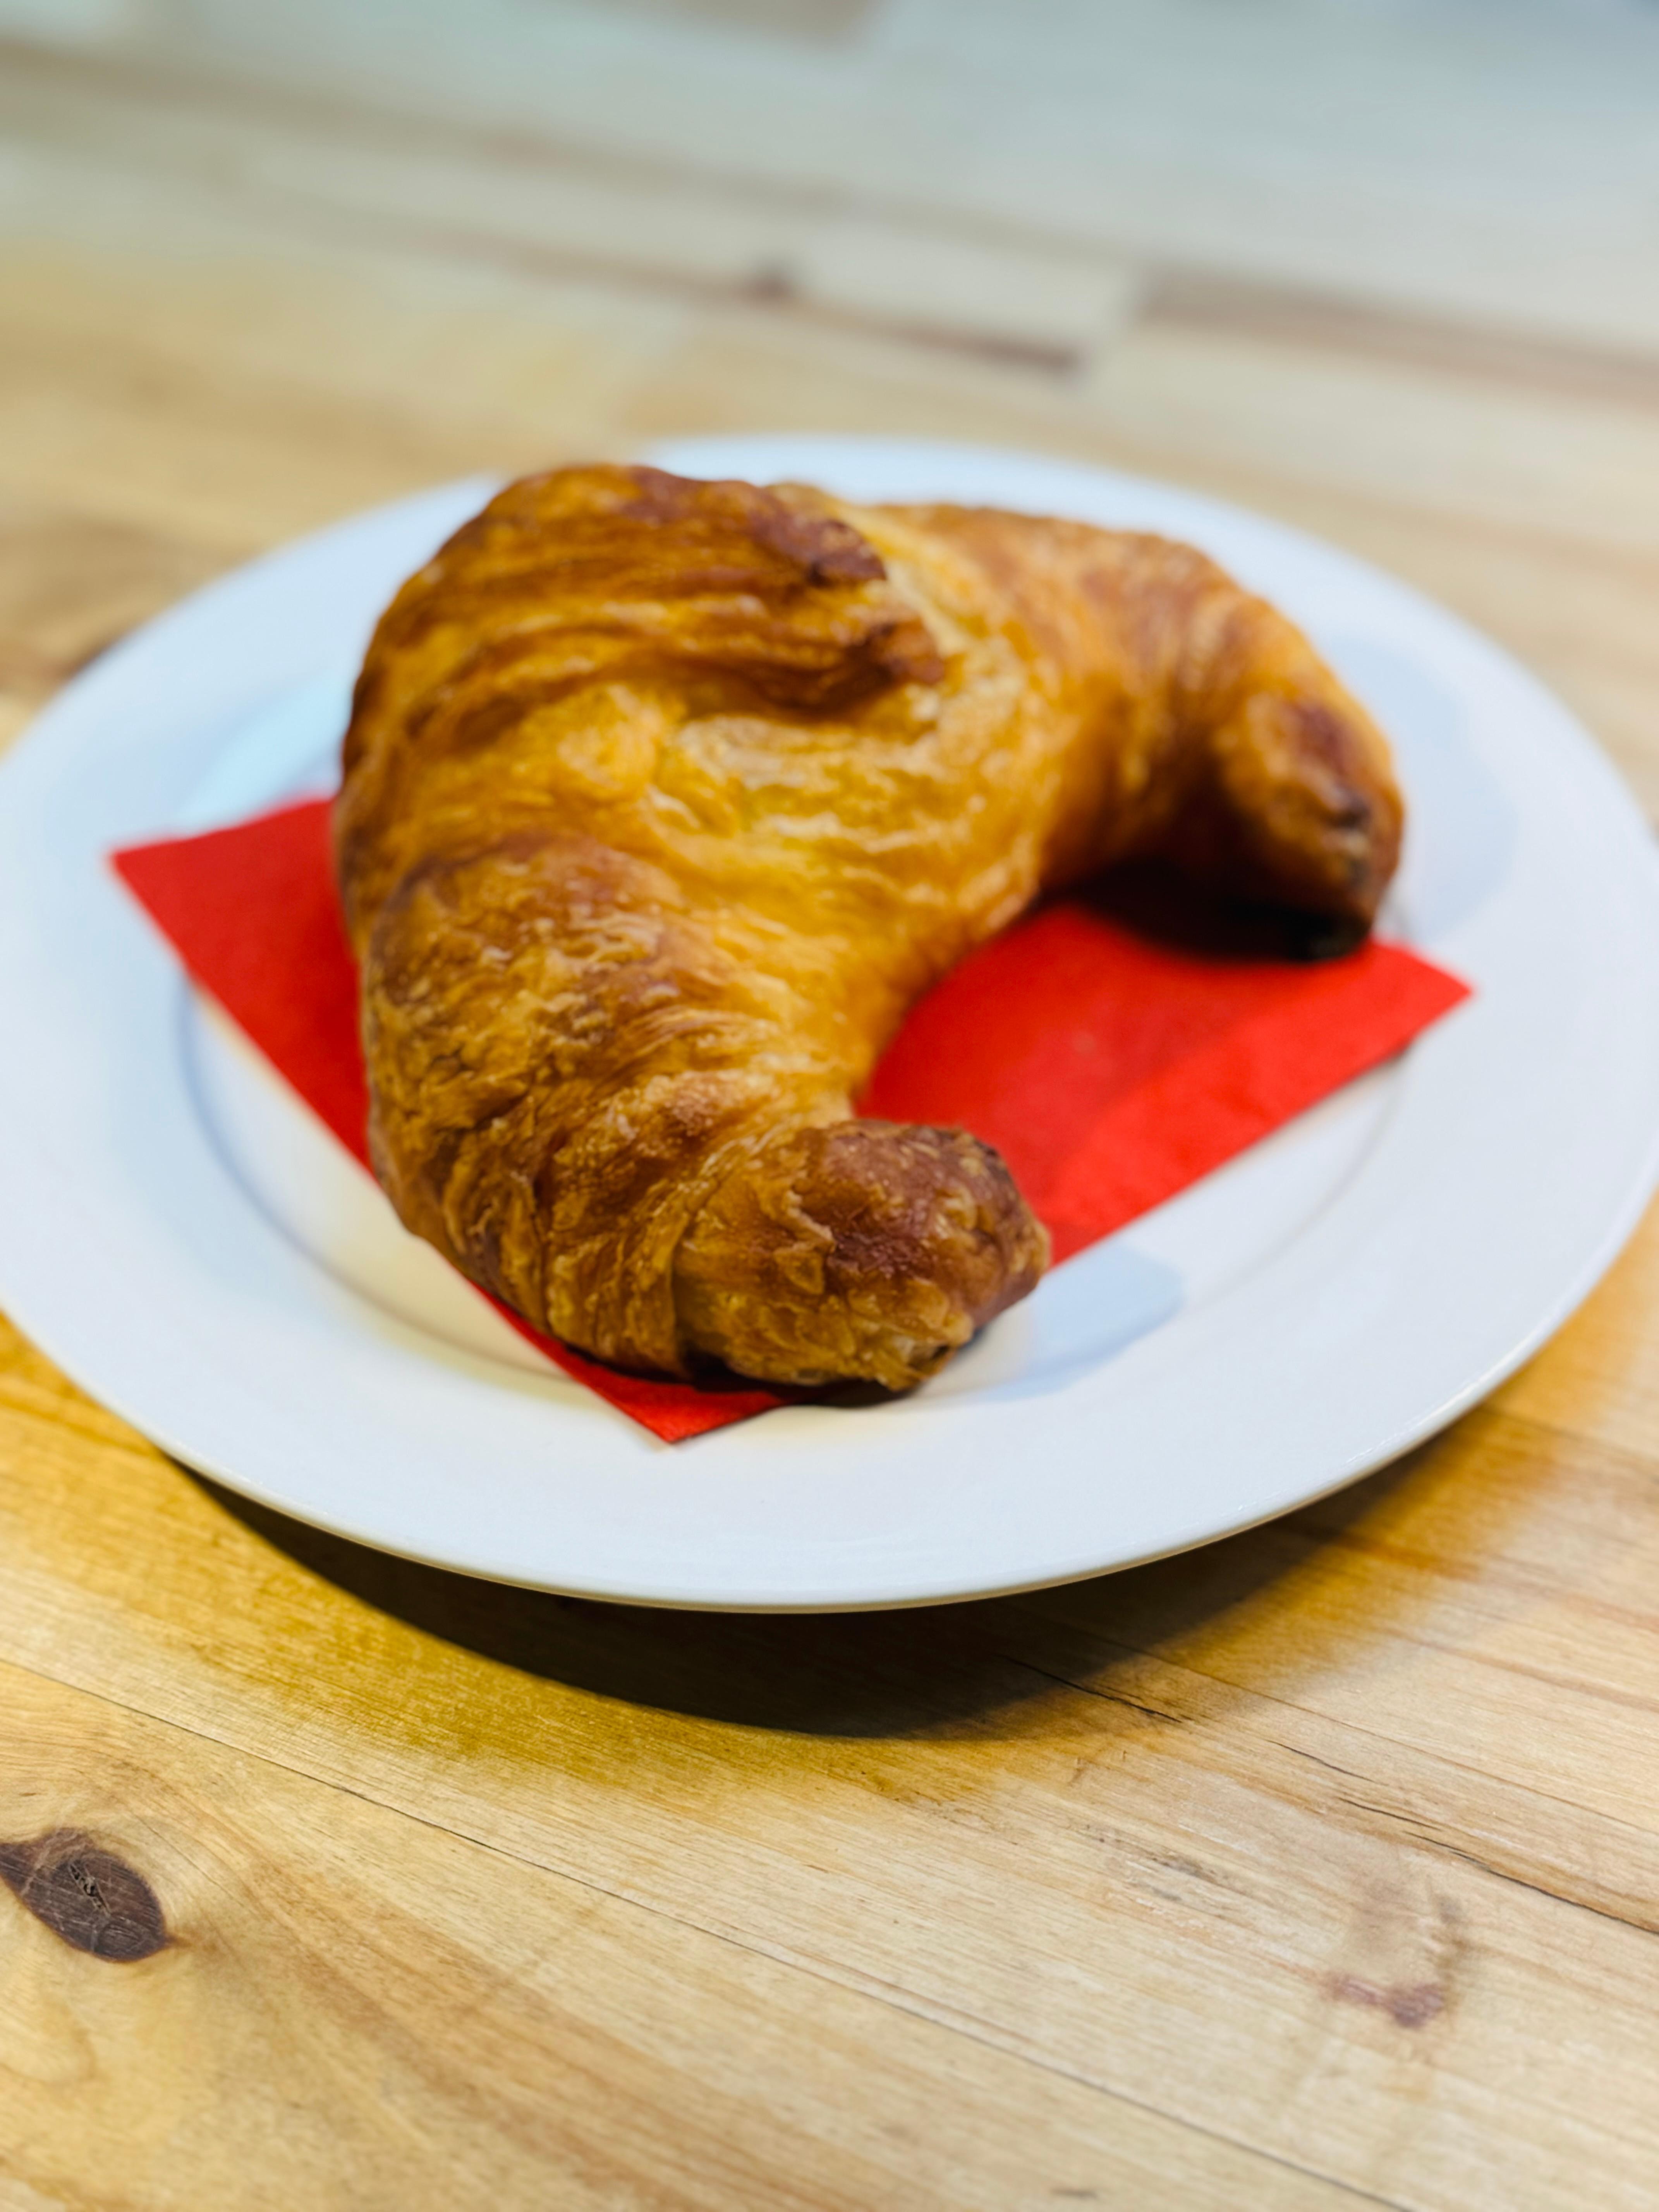 House-baked Croissant